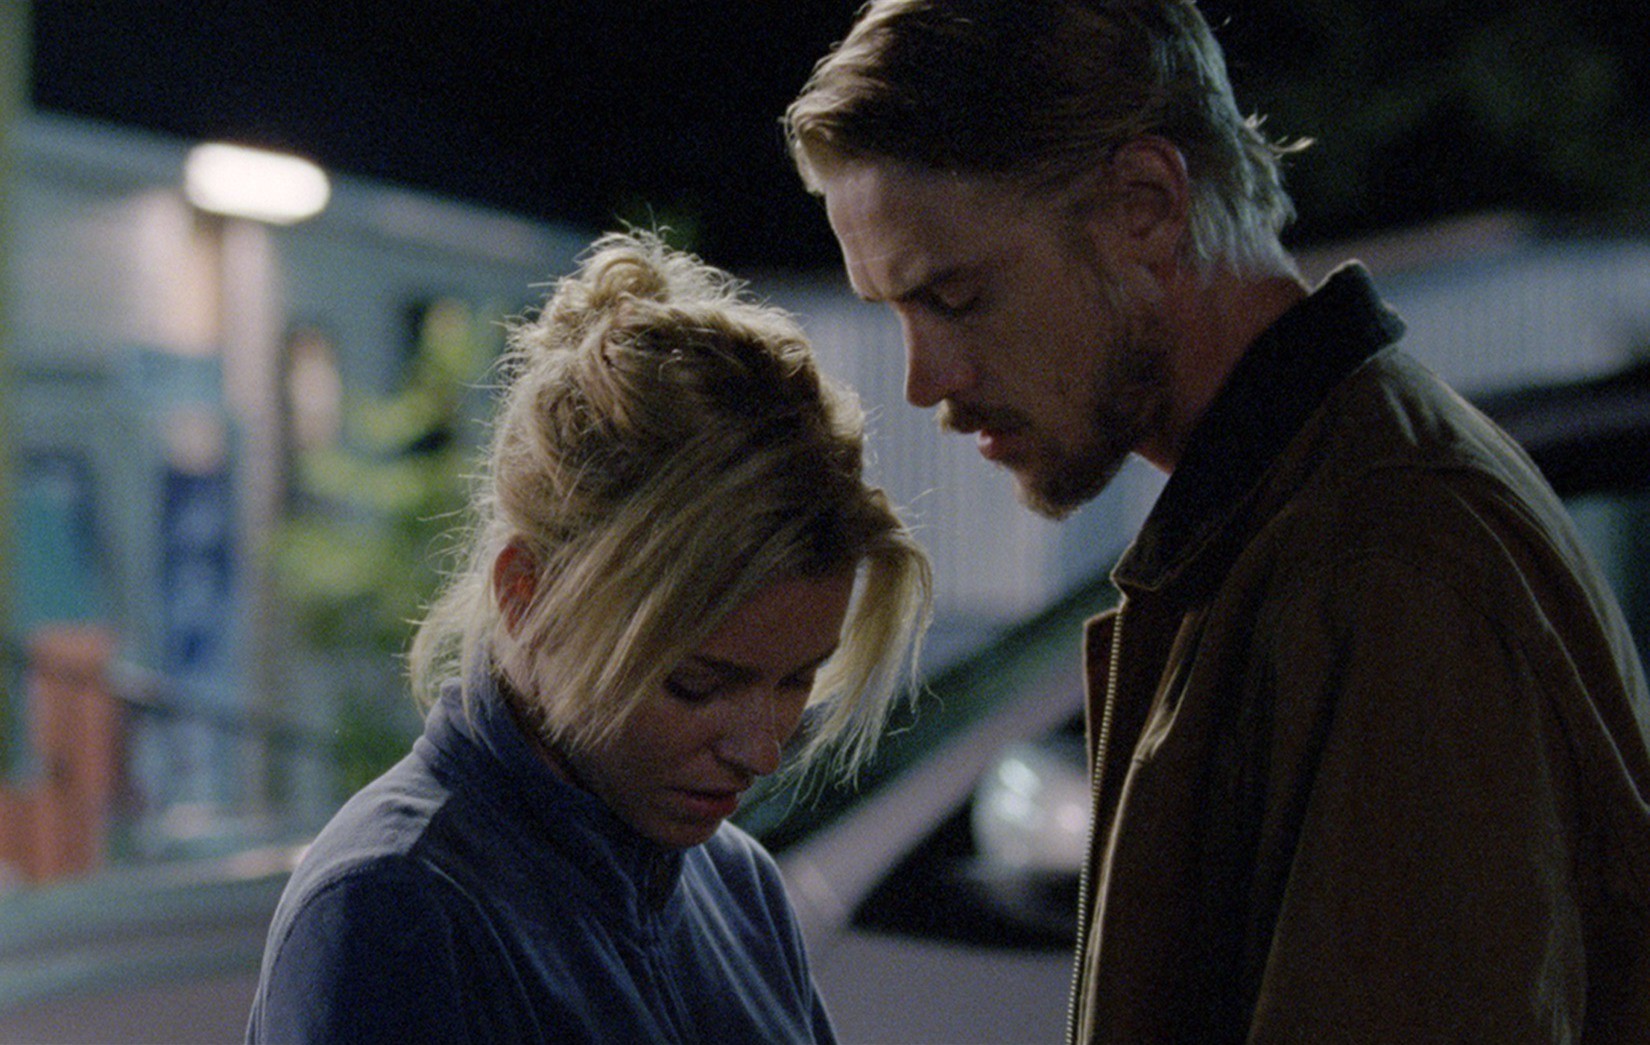 Elizabeth Banks and Boyd Holbrook in Amplify's Little Accidents (2015)